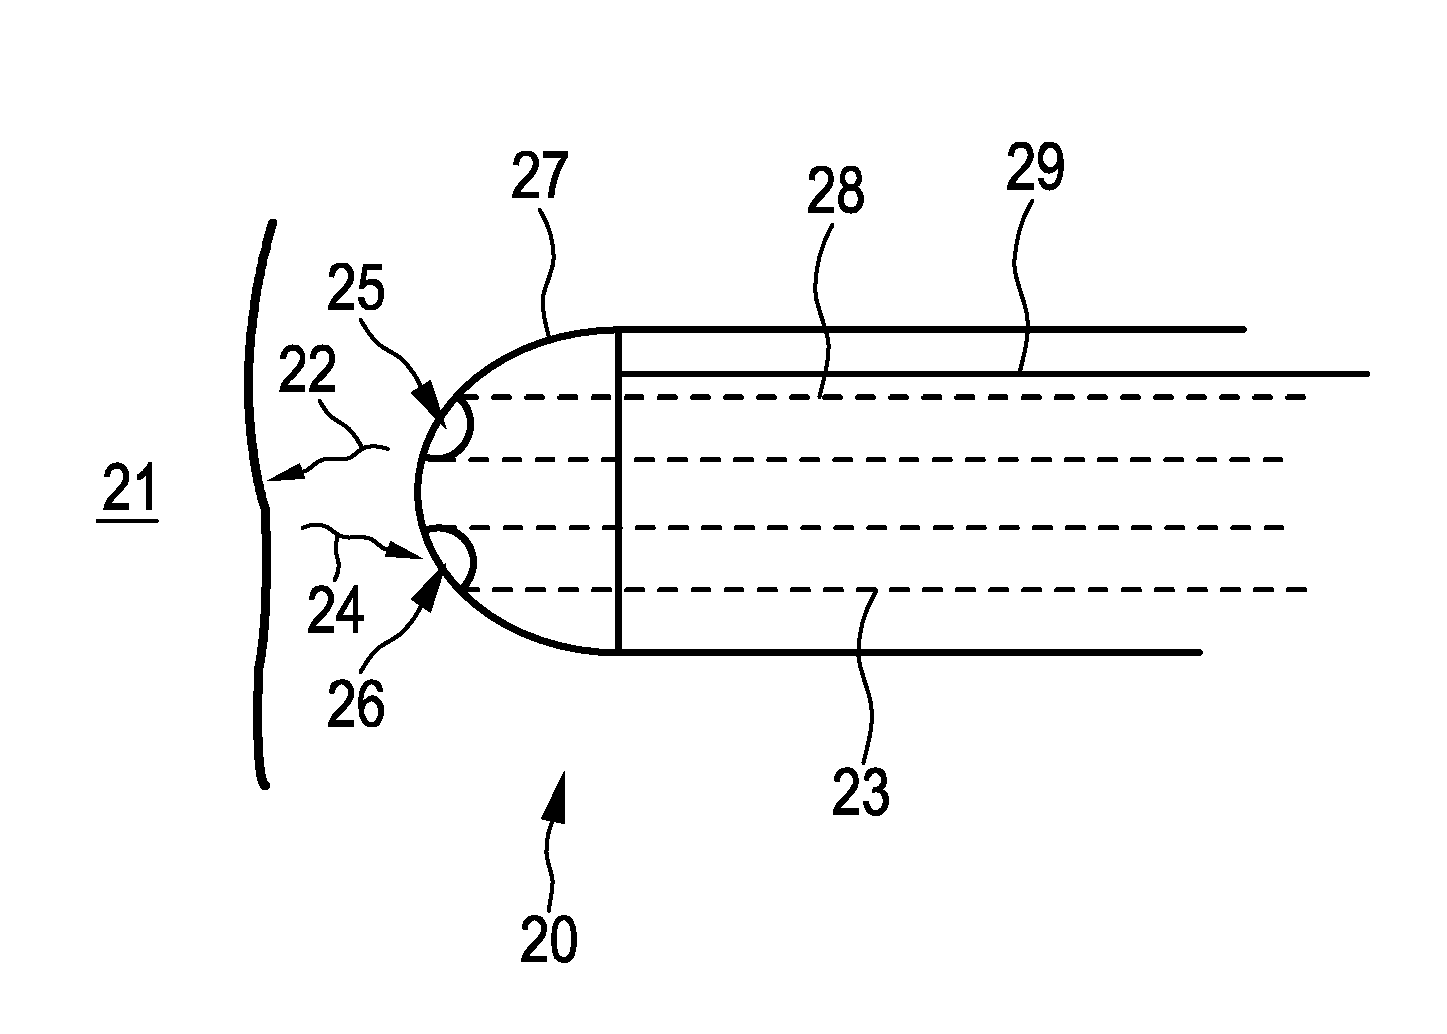 Detection apparatus for determining a state of tissue